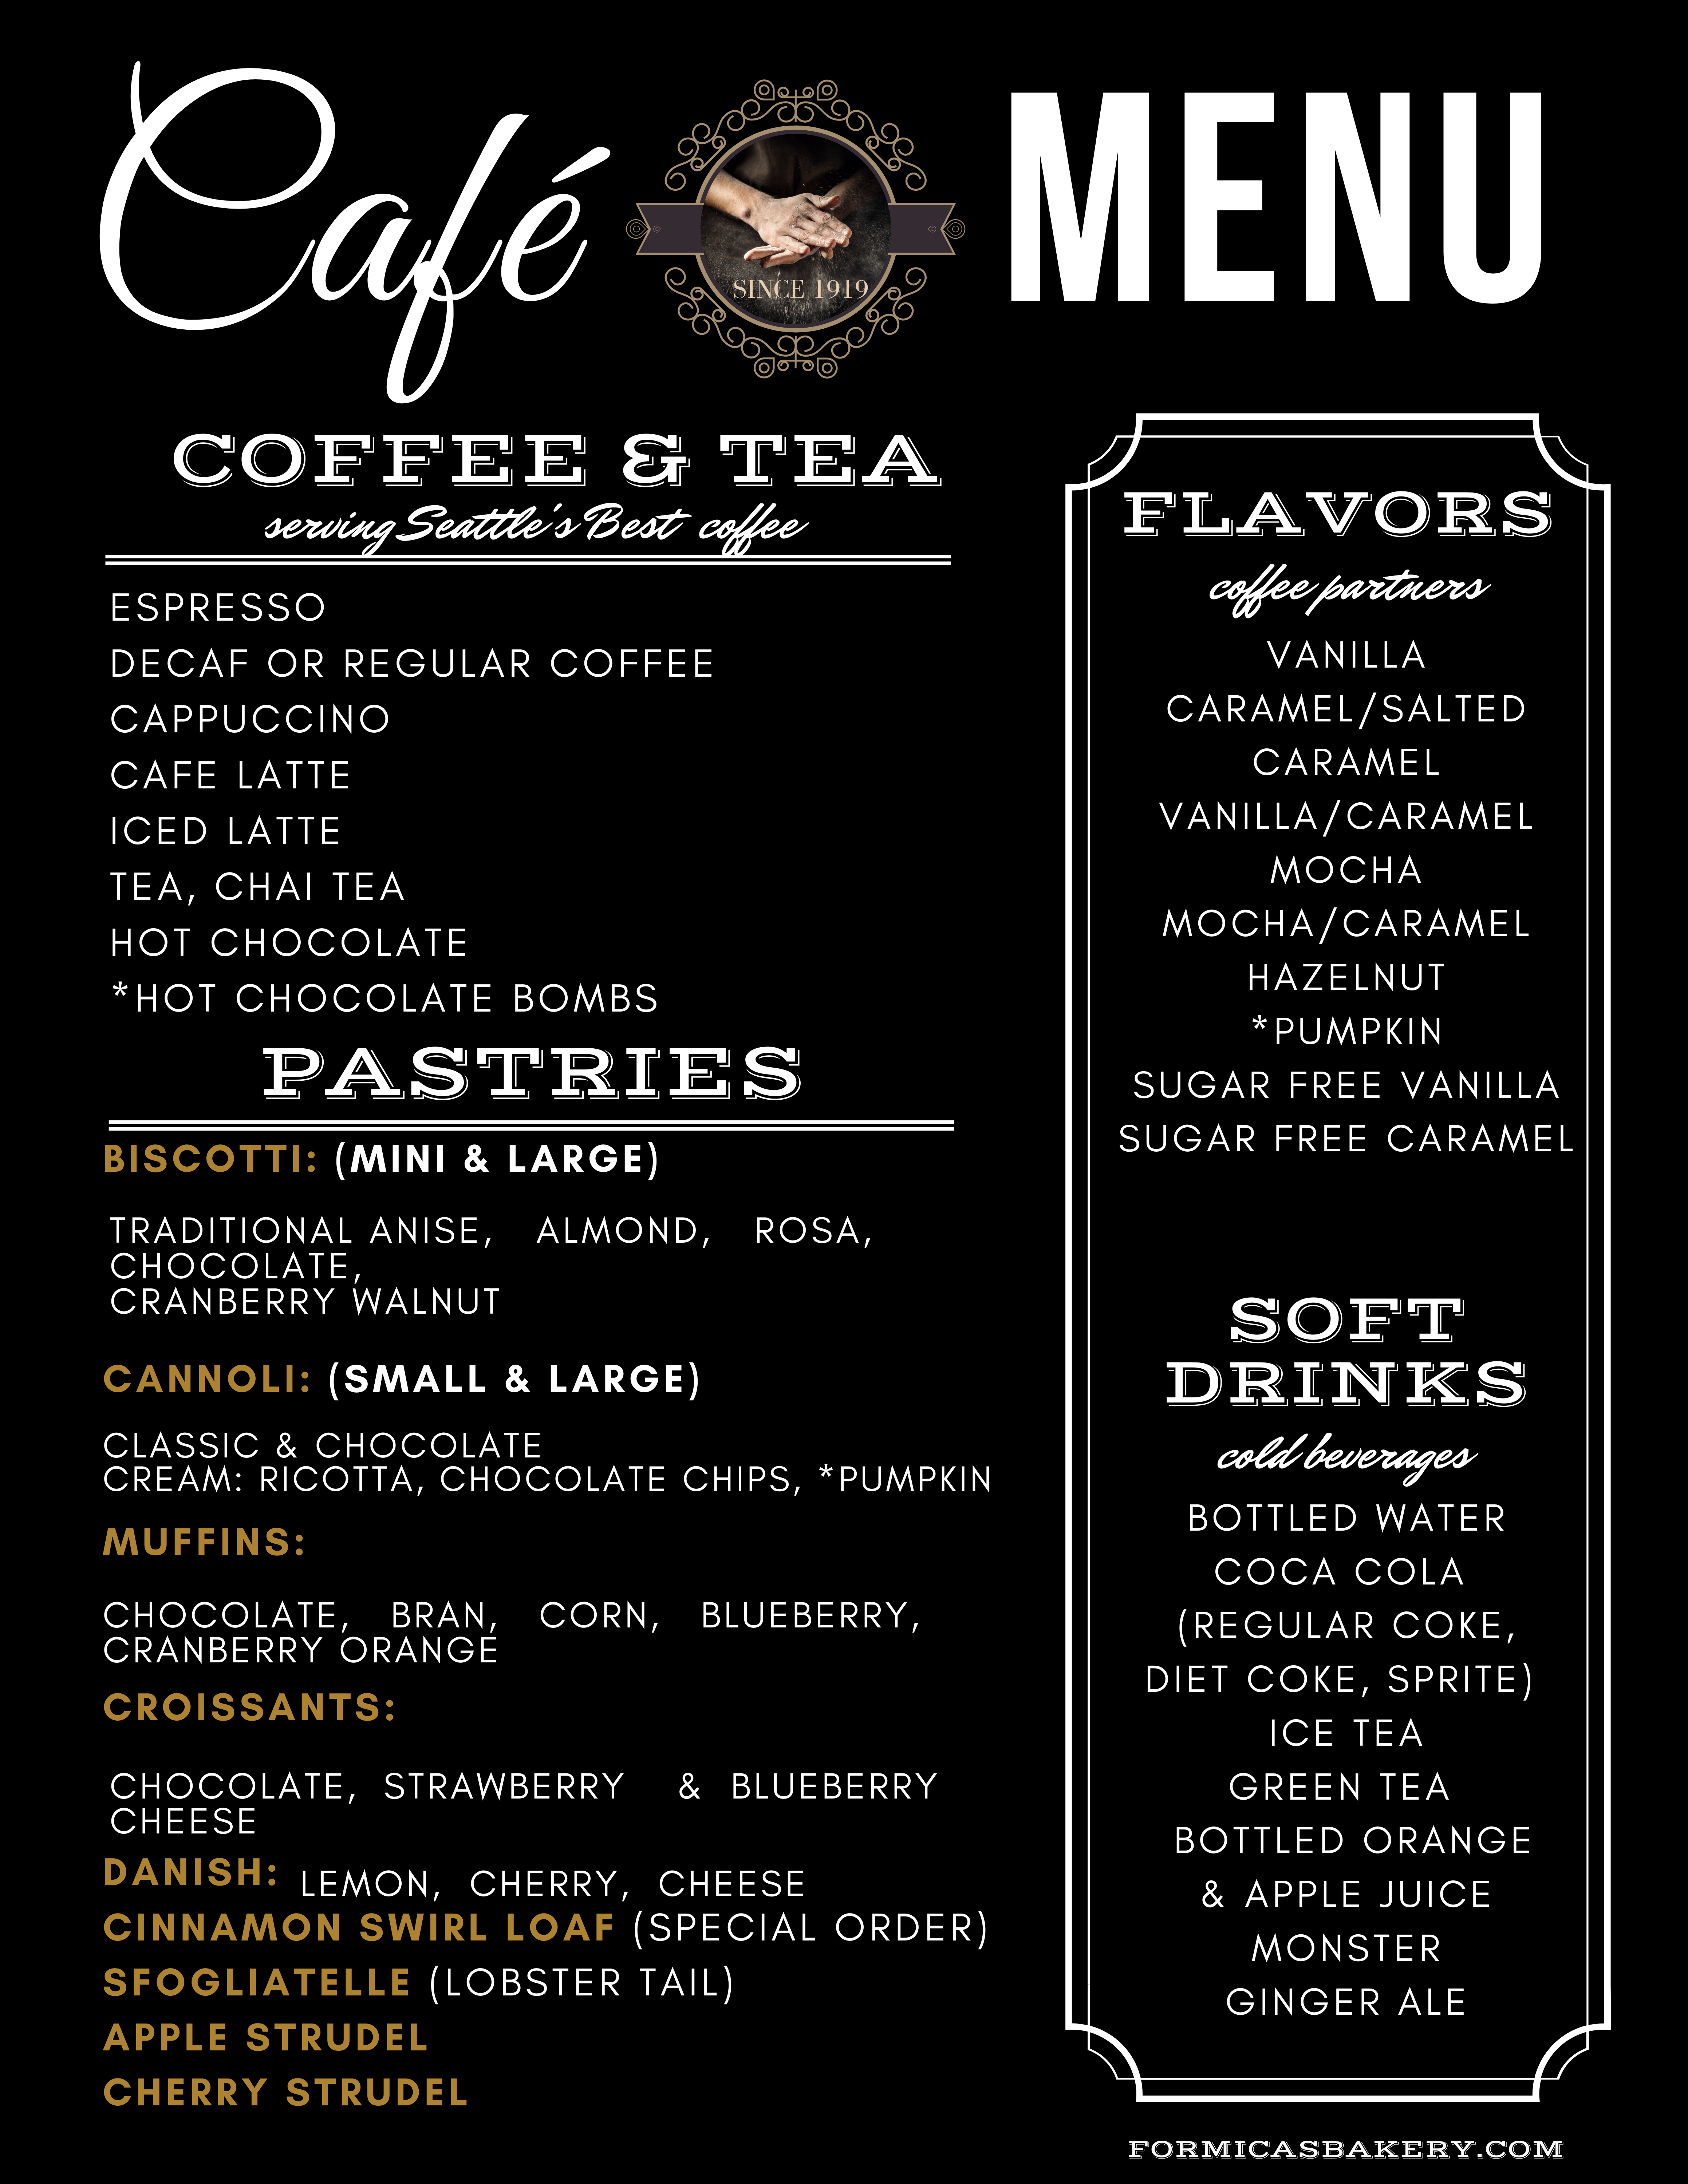 Formicas Bakery Cafe Menu Page 1